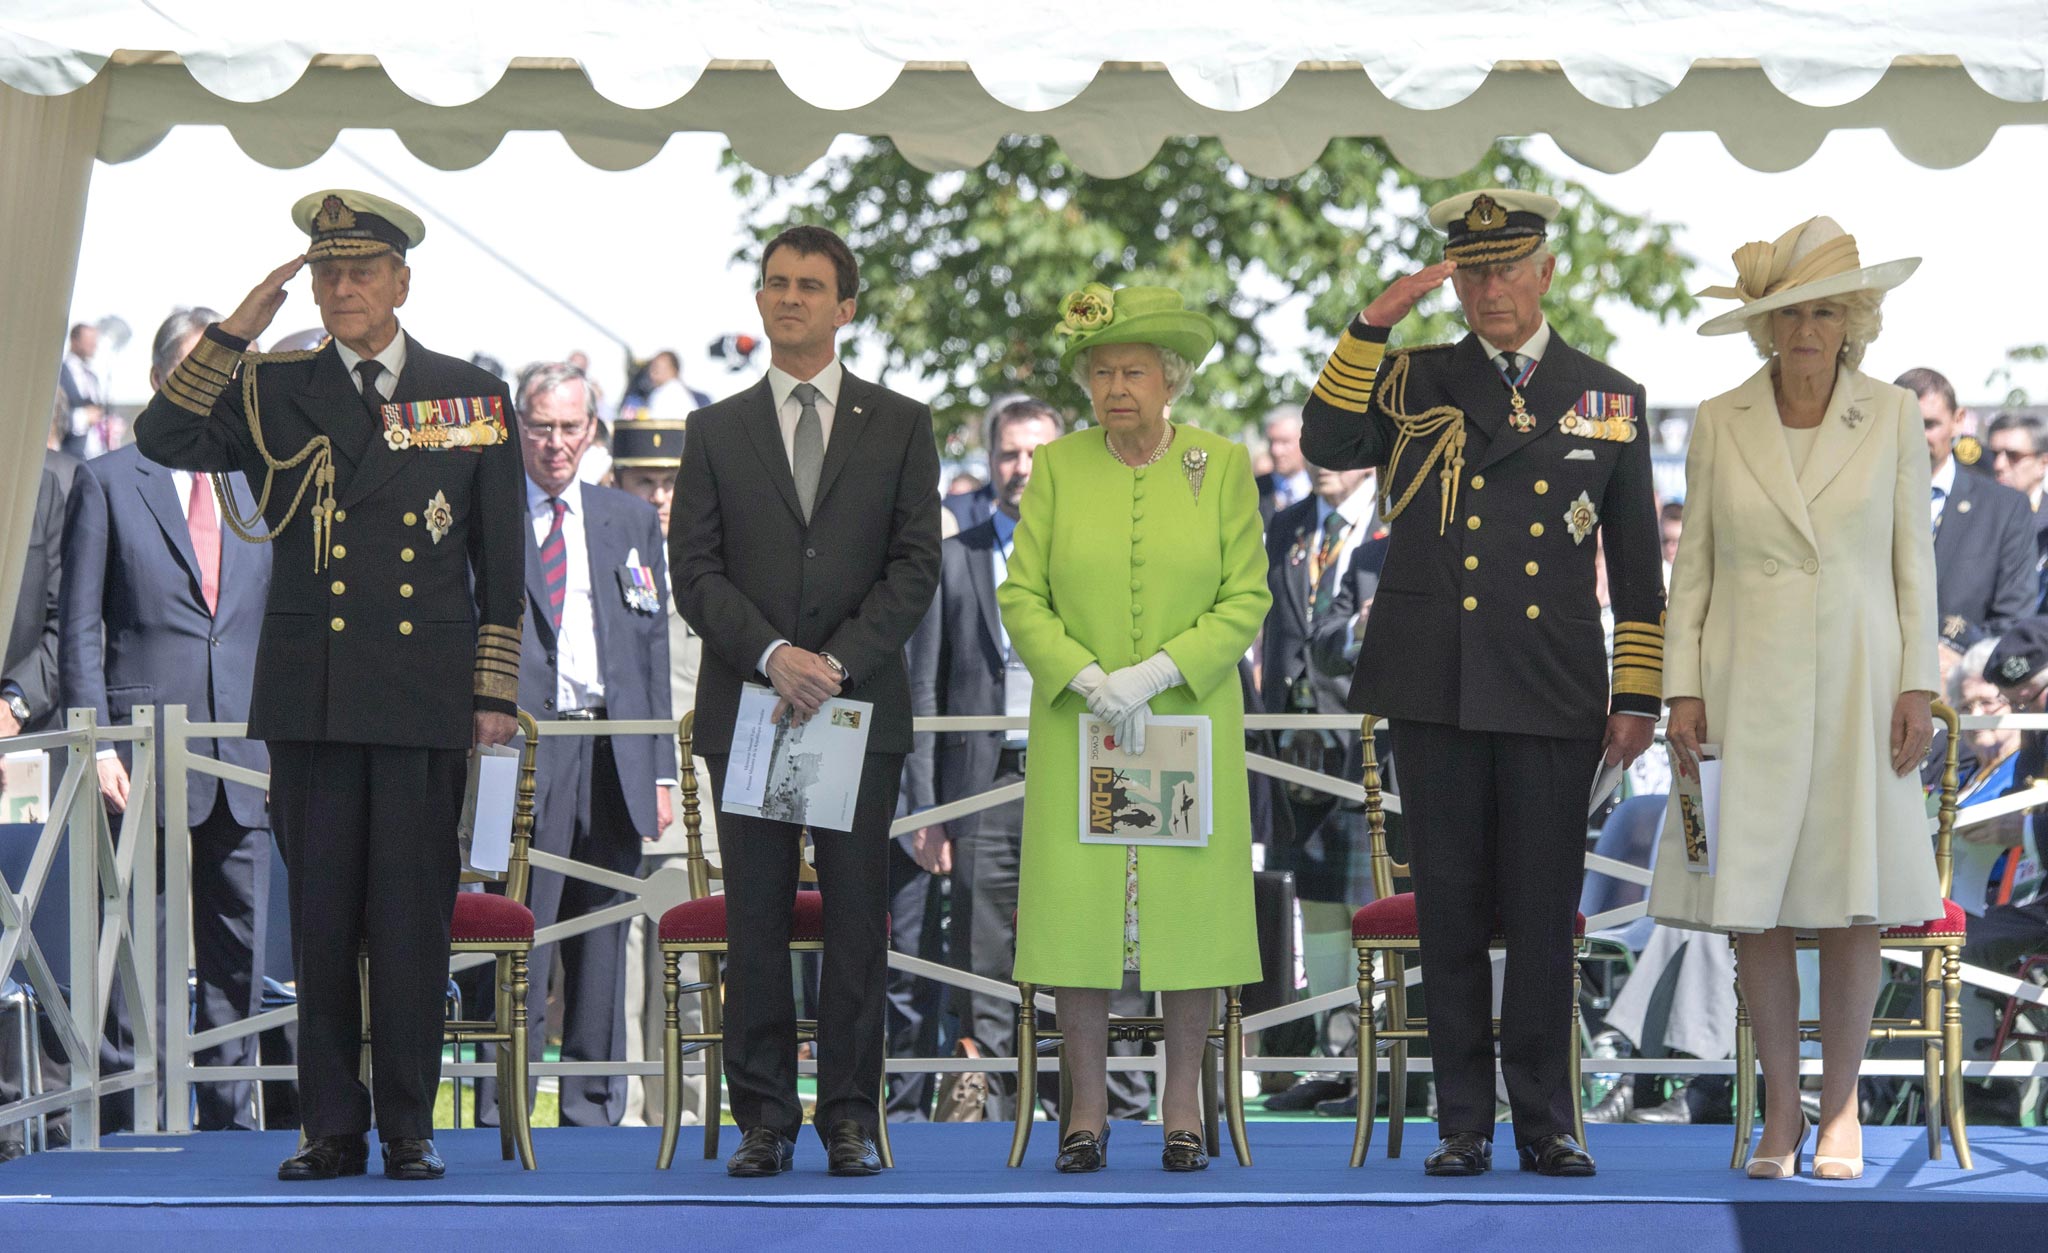 Prince Philip, Duke of Edinburgh , Prime Minister manuel valls, Queen Elizabeth ll, Prince Charles, Prince of Wales and Camilla, Duchess of Cornwall at the Bayeux Cemetary during D-Day 70 Commemorations